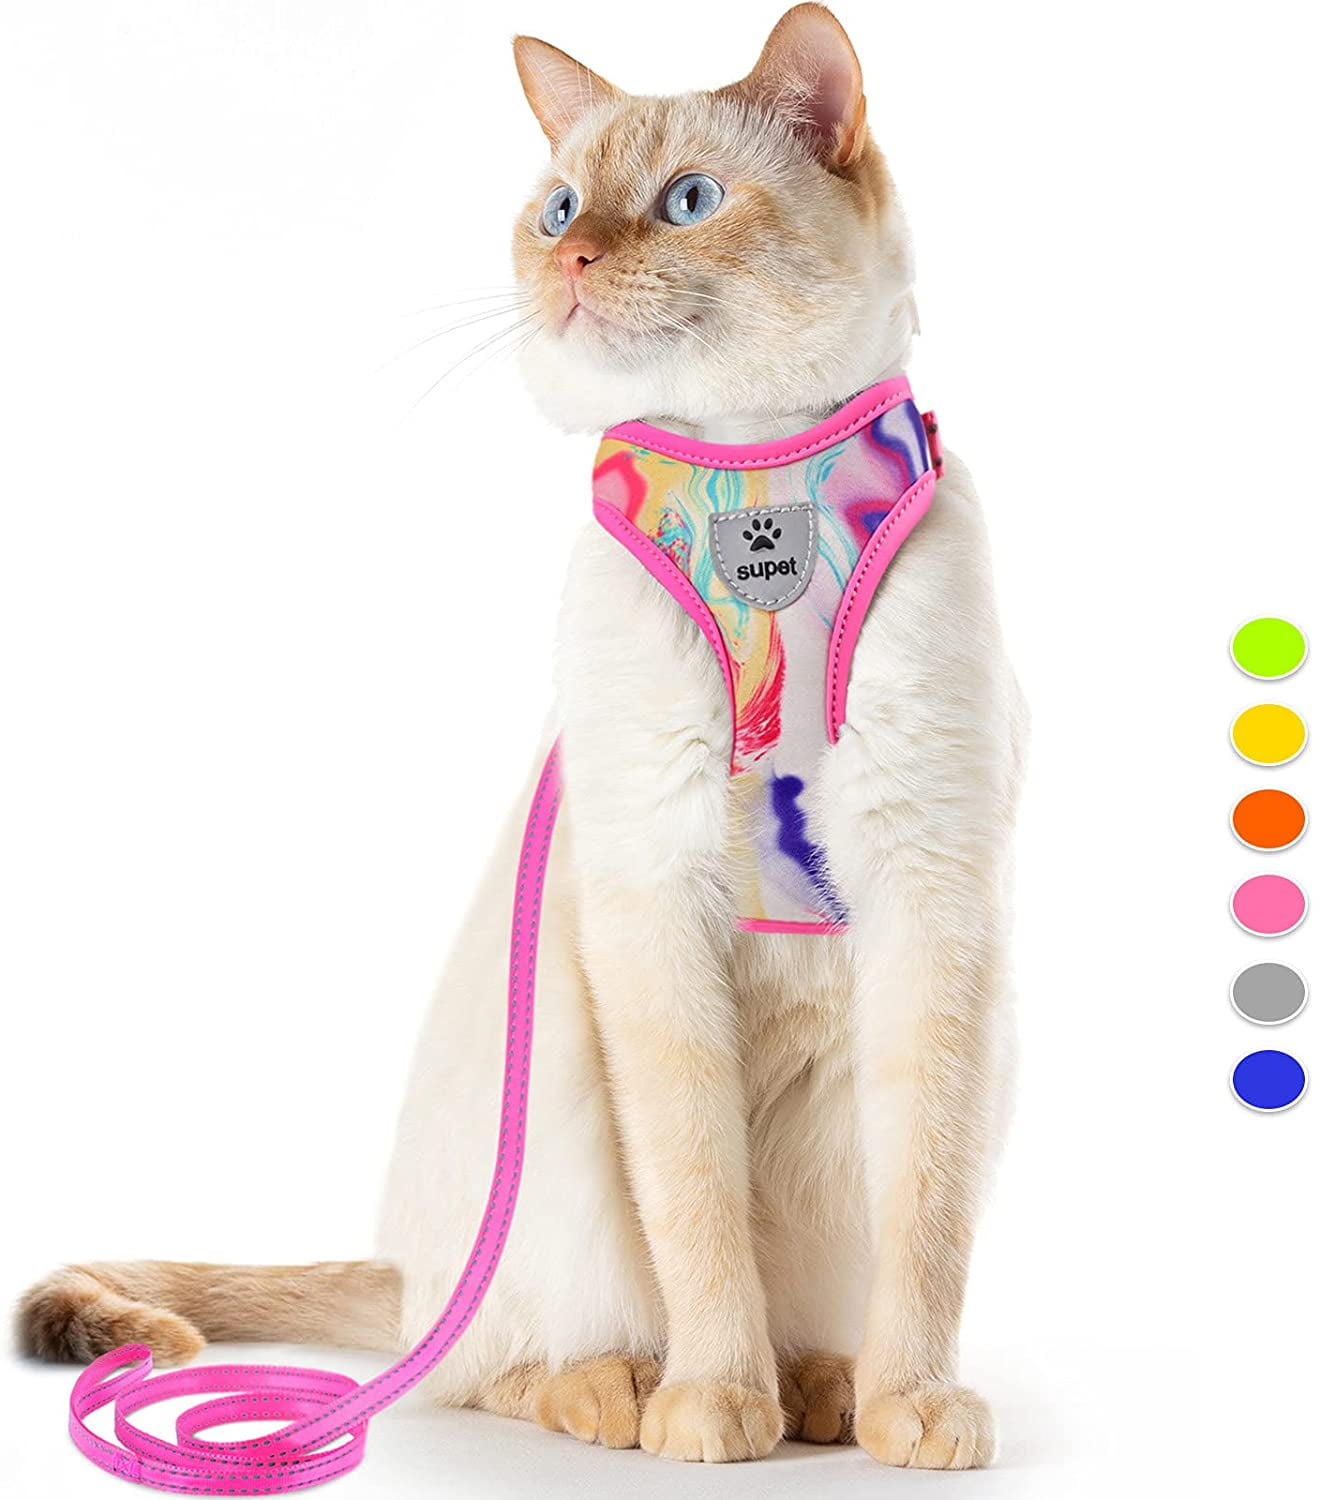 Cat Harness and Leash Set Escape Proof Kitten Harness Adjustable Cat Vest Harness with Reflective Trim Universal Cat Leash and Harness for Cats/Puppies Outdoor Walking 